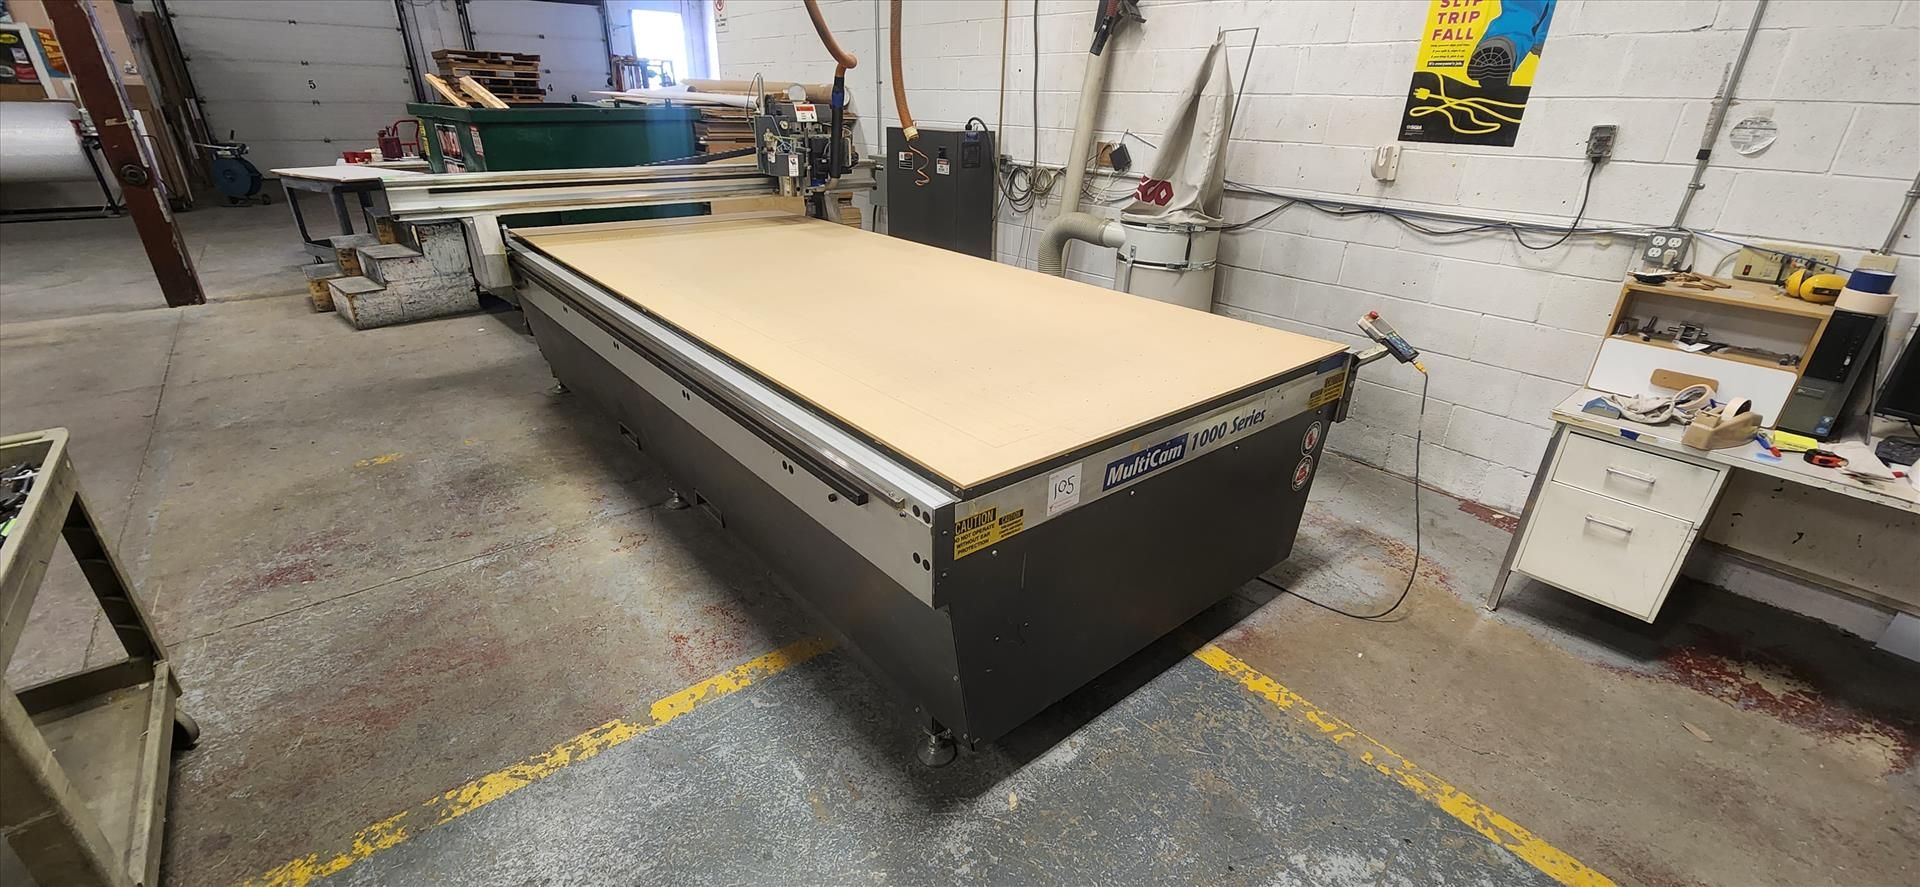 MultiCam 1000 Series CNC router, ser. no. 1-204-R06788 (2008), 61 in. x 145 in. table, c/w 12.6 kw